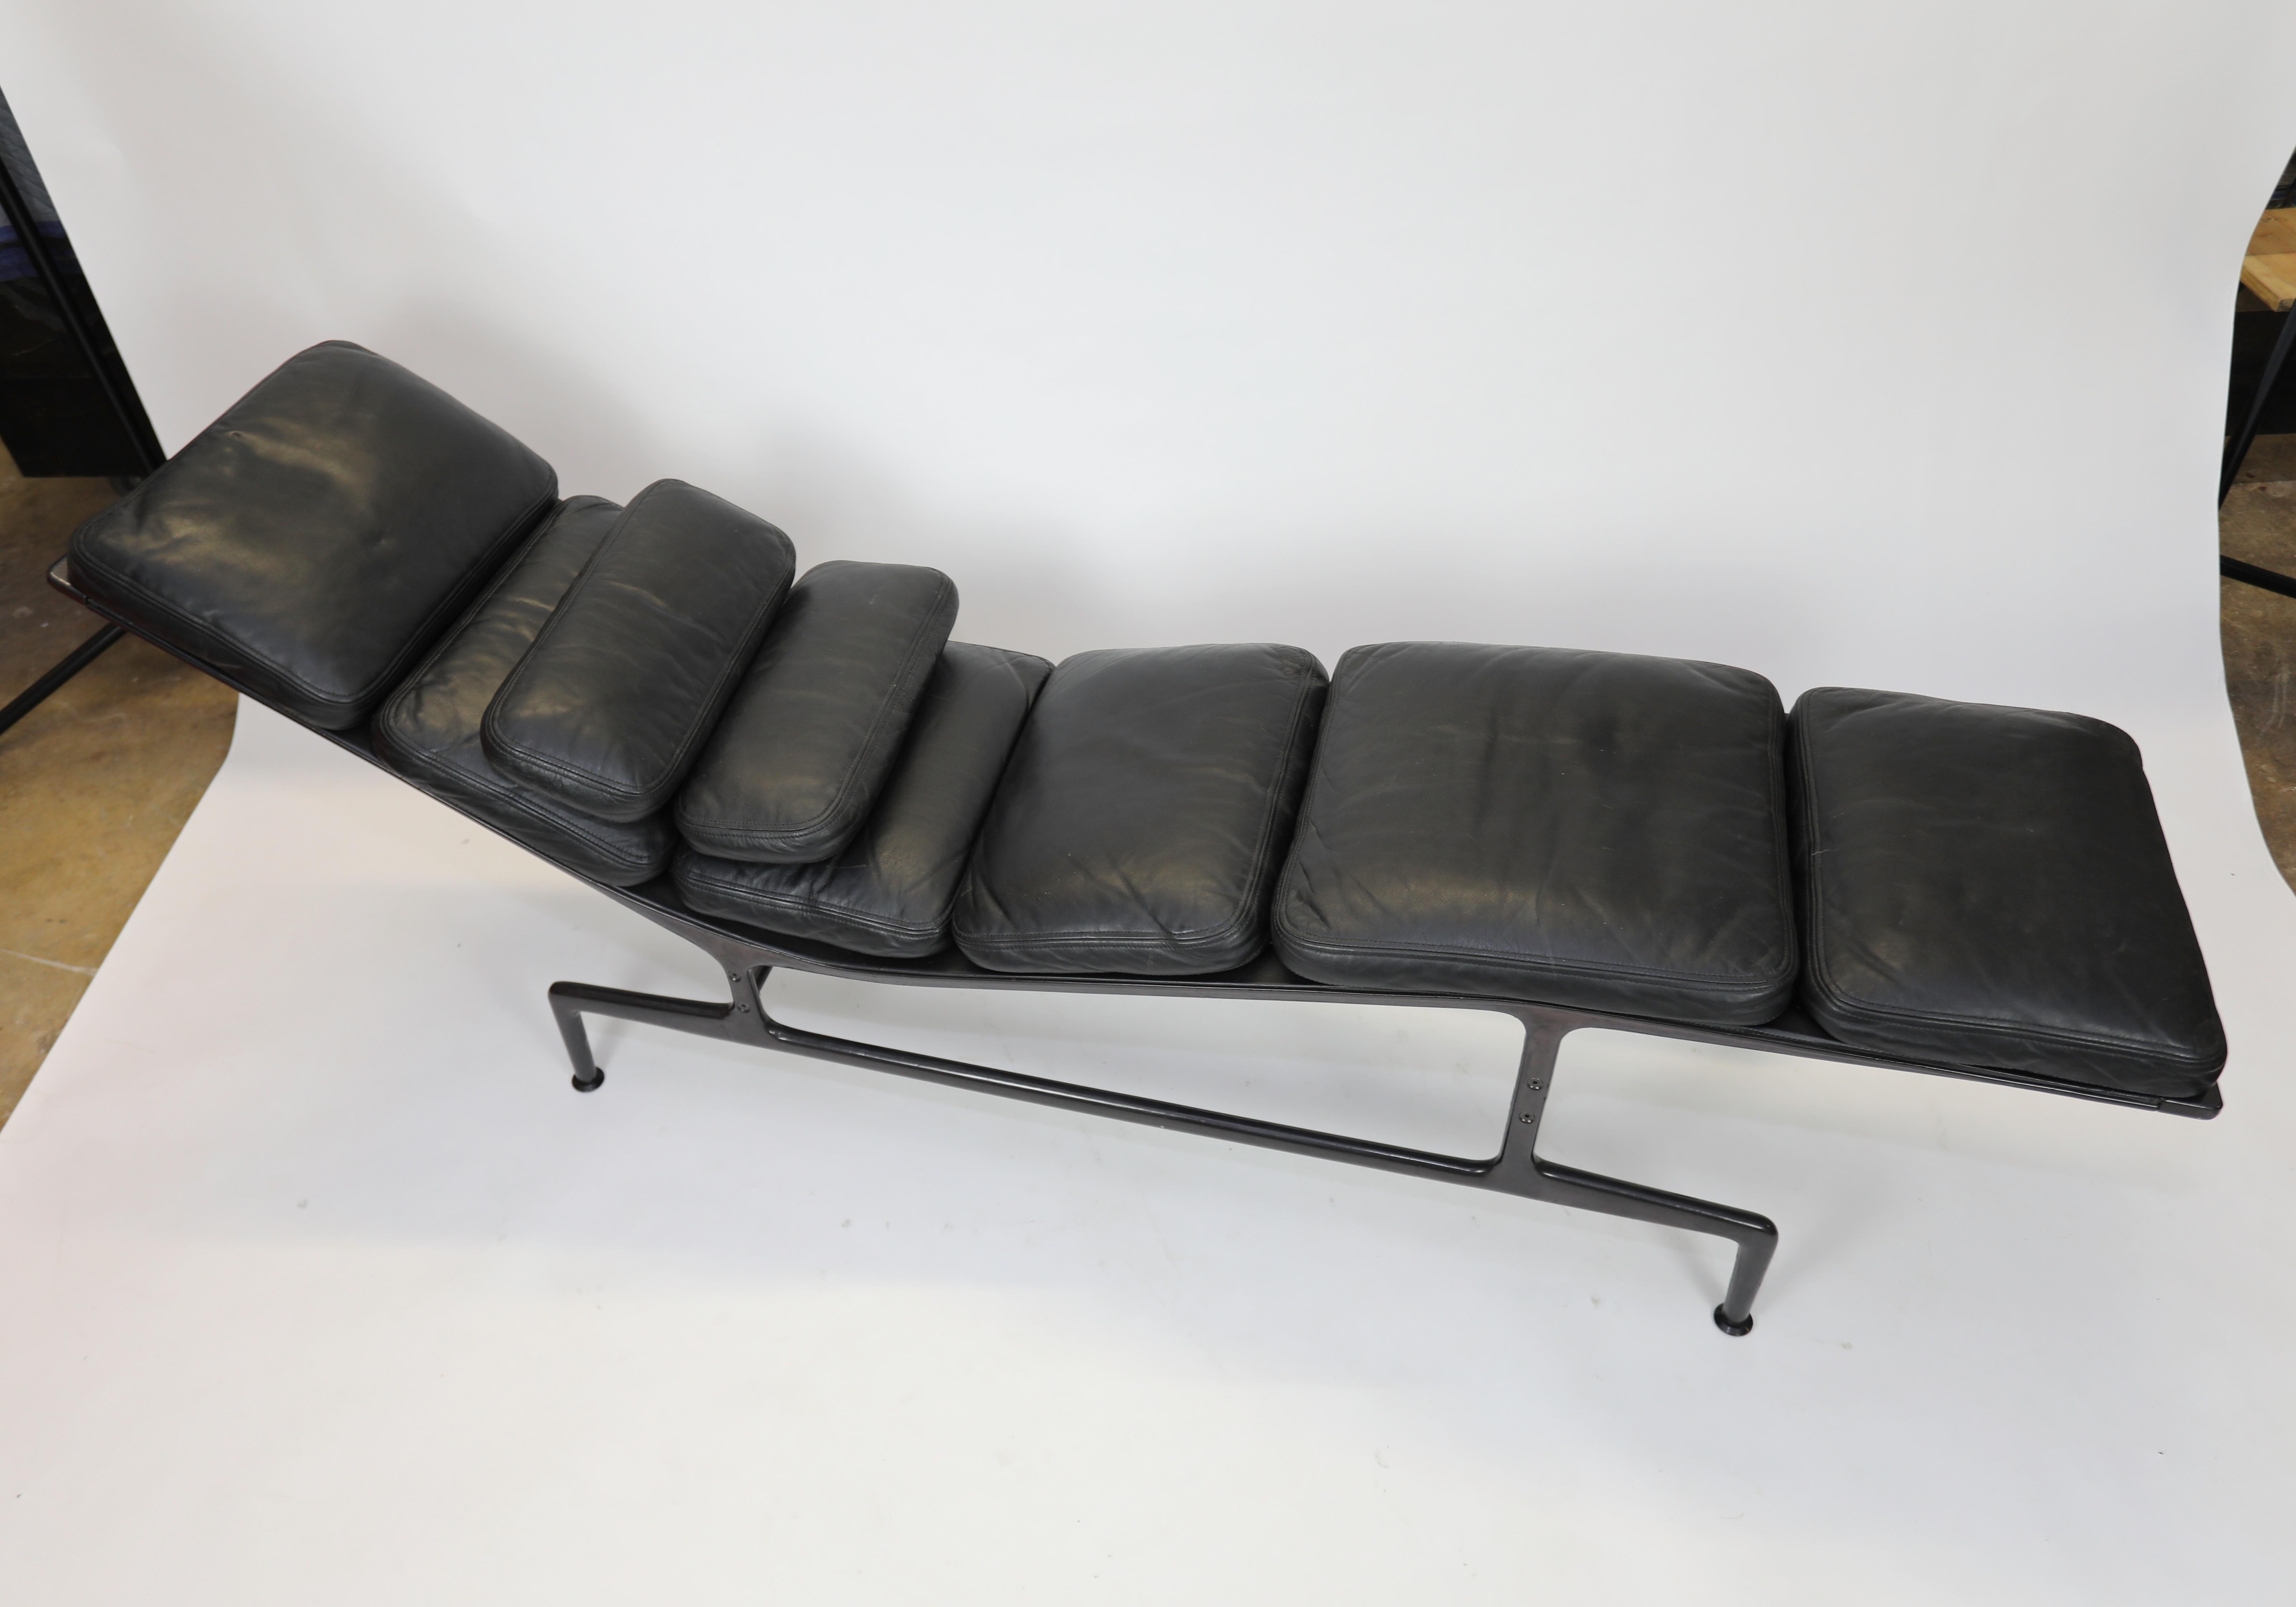 herman miller chaise lounge